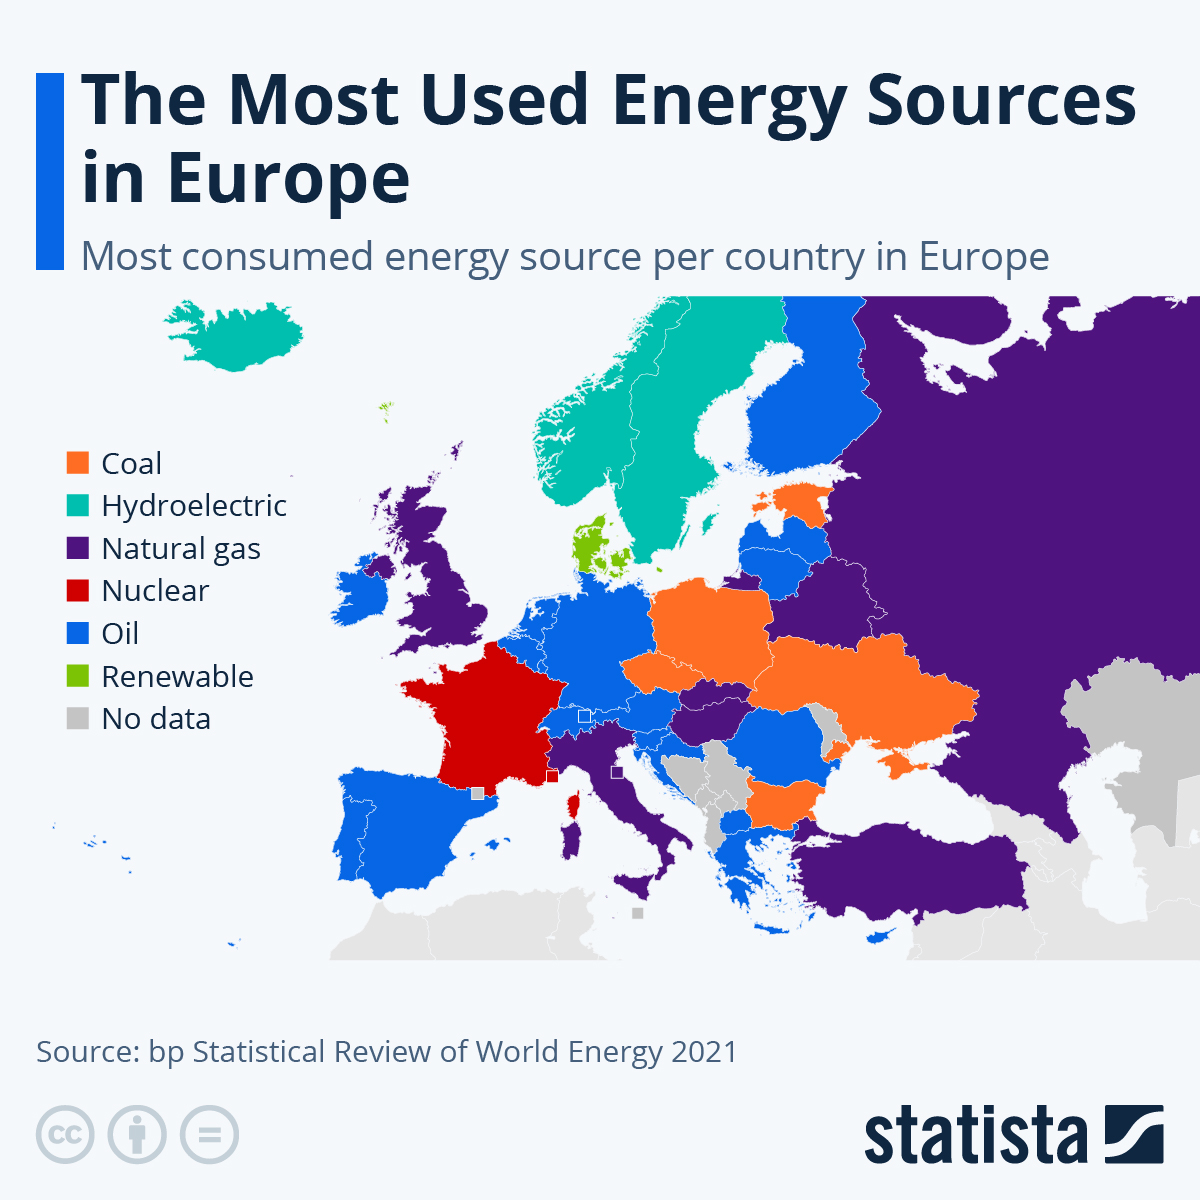 The Most Used Energy Sources in Europe
